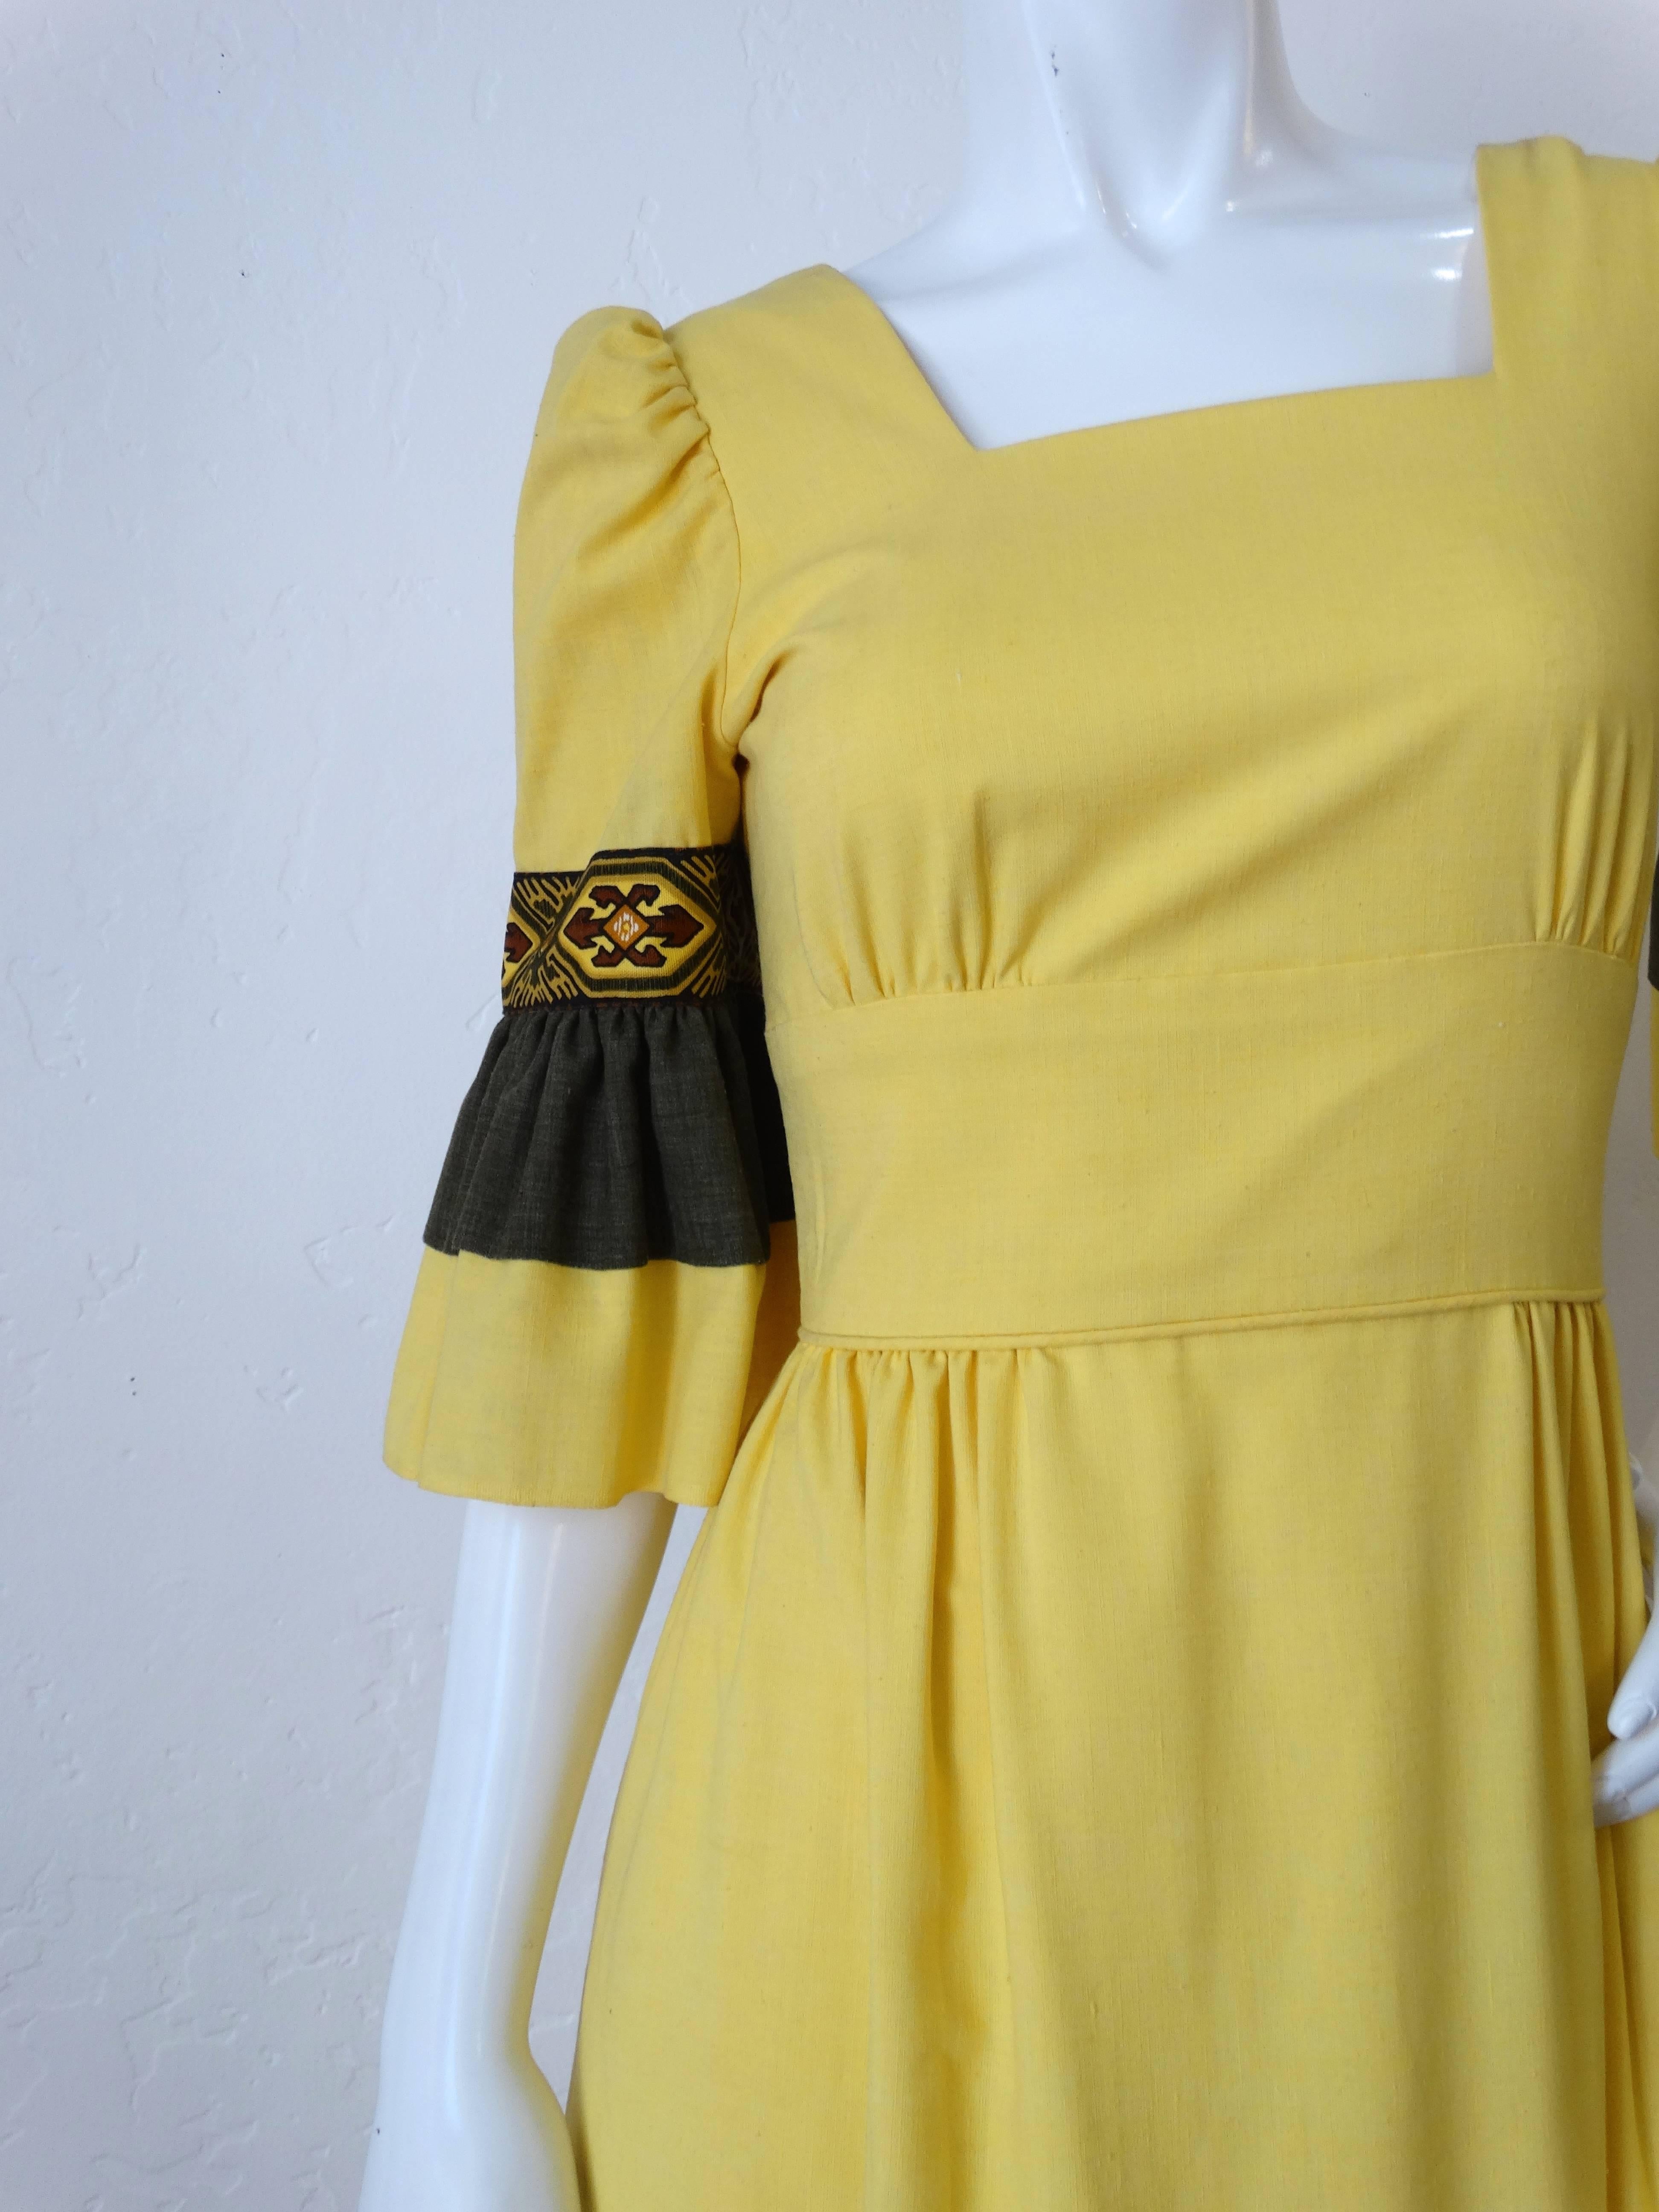 Early 1970s Handmade Southwestern Prairie dress! Flattering empire waistline with square neckline. Tiered skirt with black panel and geometric trim. Layered bell sleeves with matching trim. Zips up the back. “An Original By Kathy Henry” tag. Made in